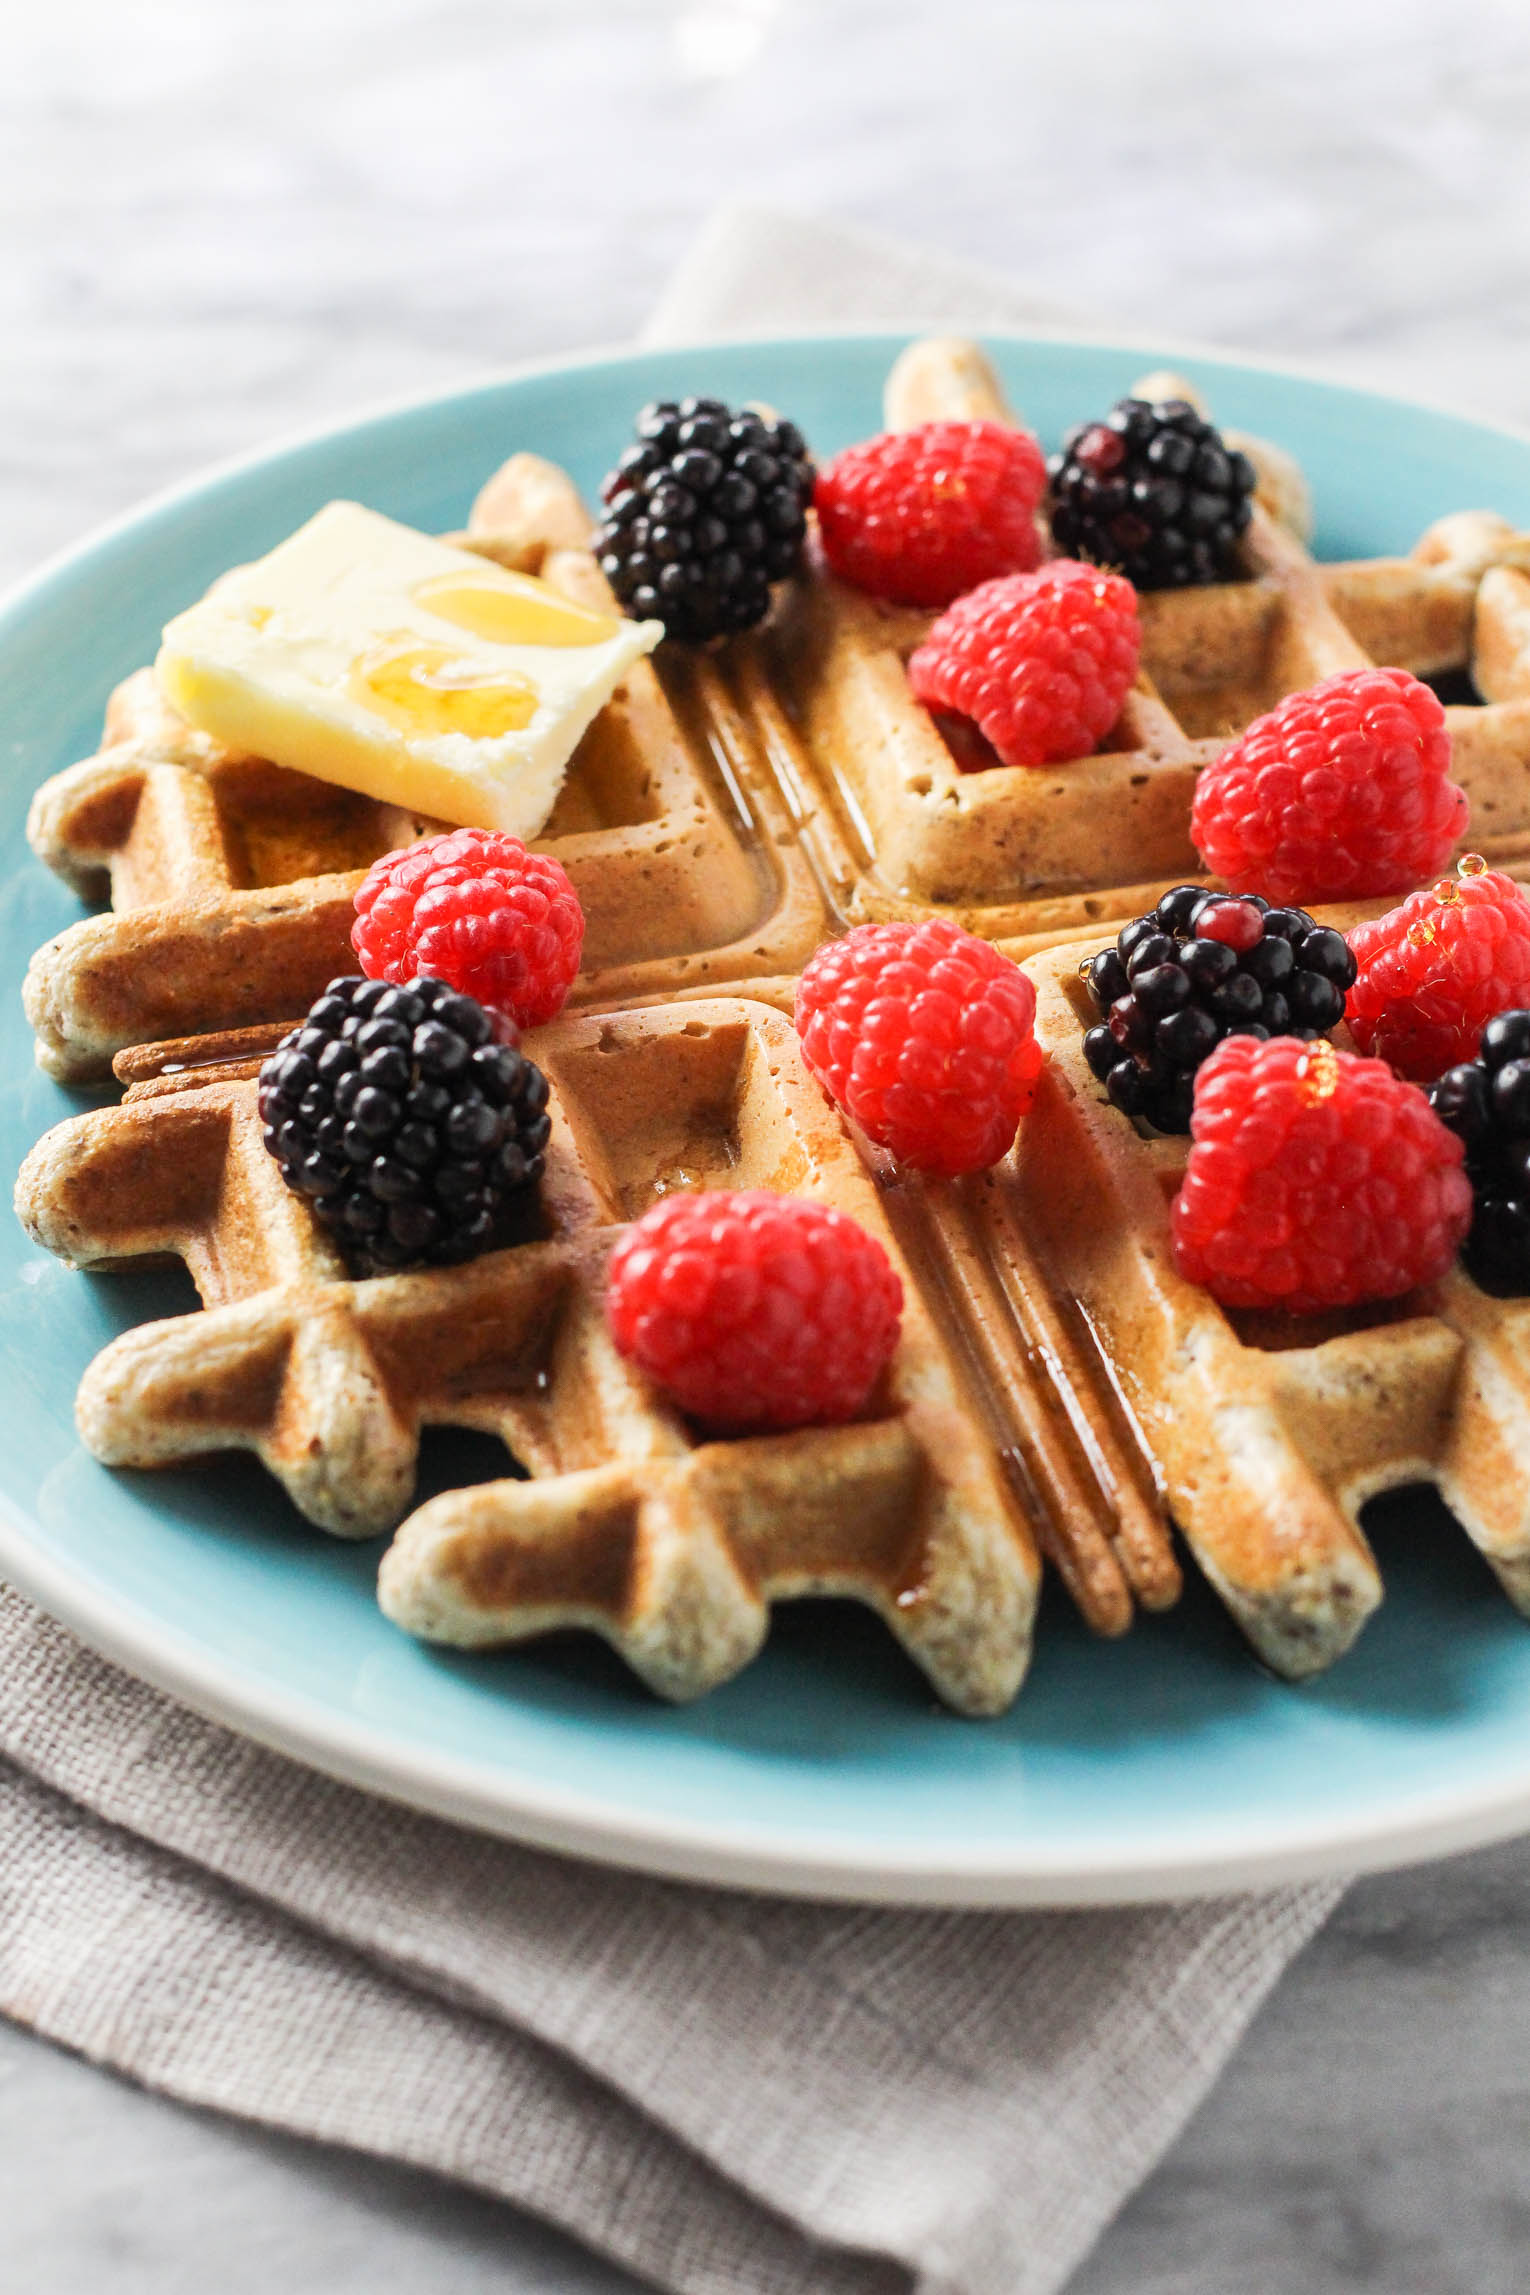 A side view shot of a whole wheat waffle on a blue plate. The waffle is garnished with berries, butter, and maple syrup.